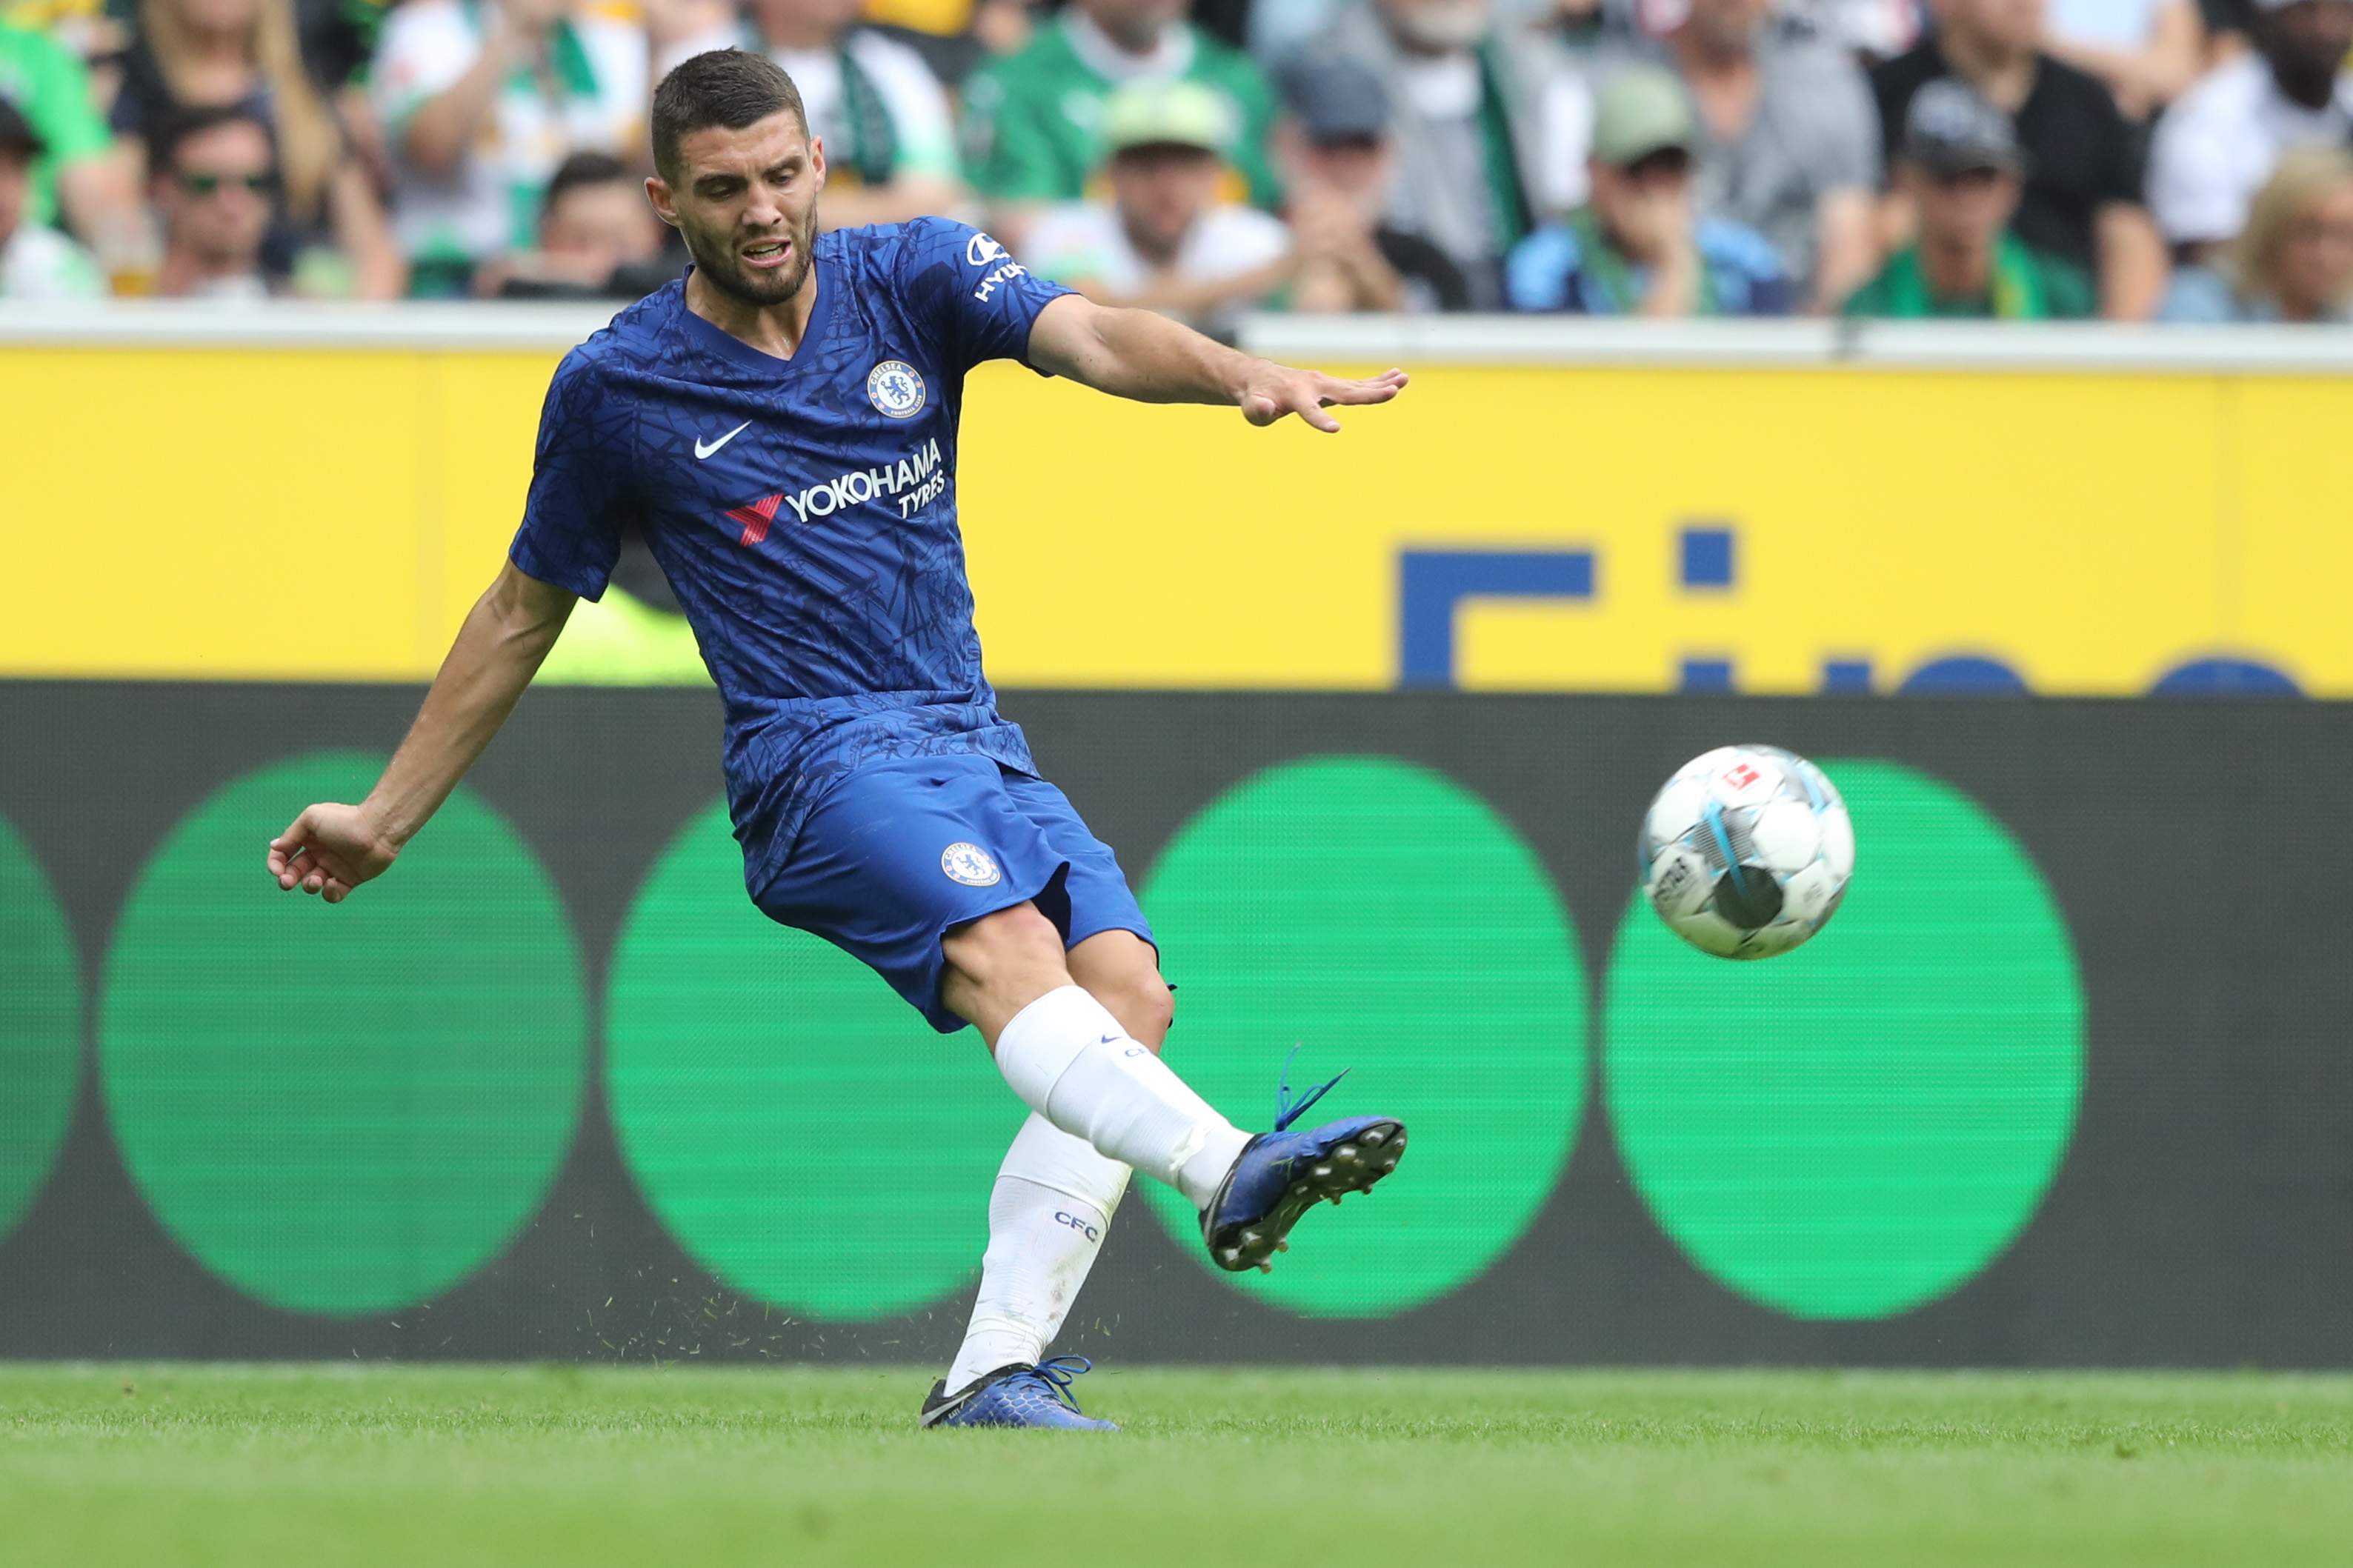 MOENCHENGLADBACH, GERMANY - AUGUST 03: Mateo Kovacic of Chelsea runs with the ball during the pre-season friendly match between Borussia Moenchengladbach and FC Chelsea at Borussia-Park on August 03, 2019 in Moenchengladbach, Germany. The match between Moenchengladbach and Chelsea ended 2-2.  (Photo by Christof Koepsel/Bongarts/Getty Images)